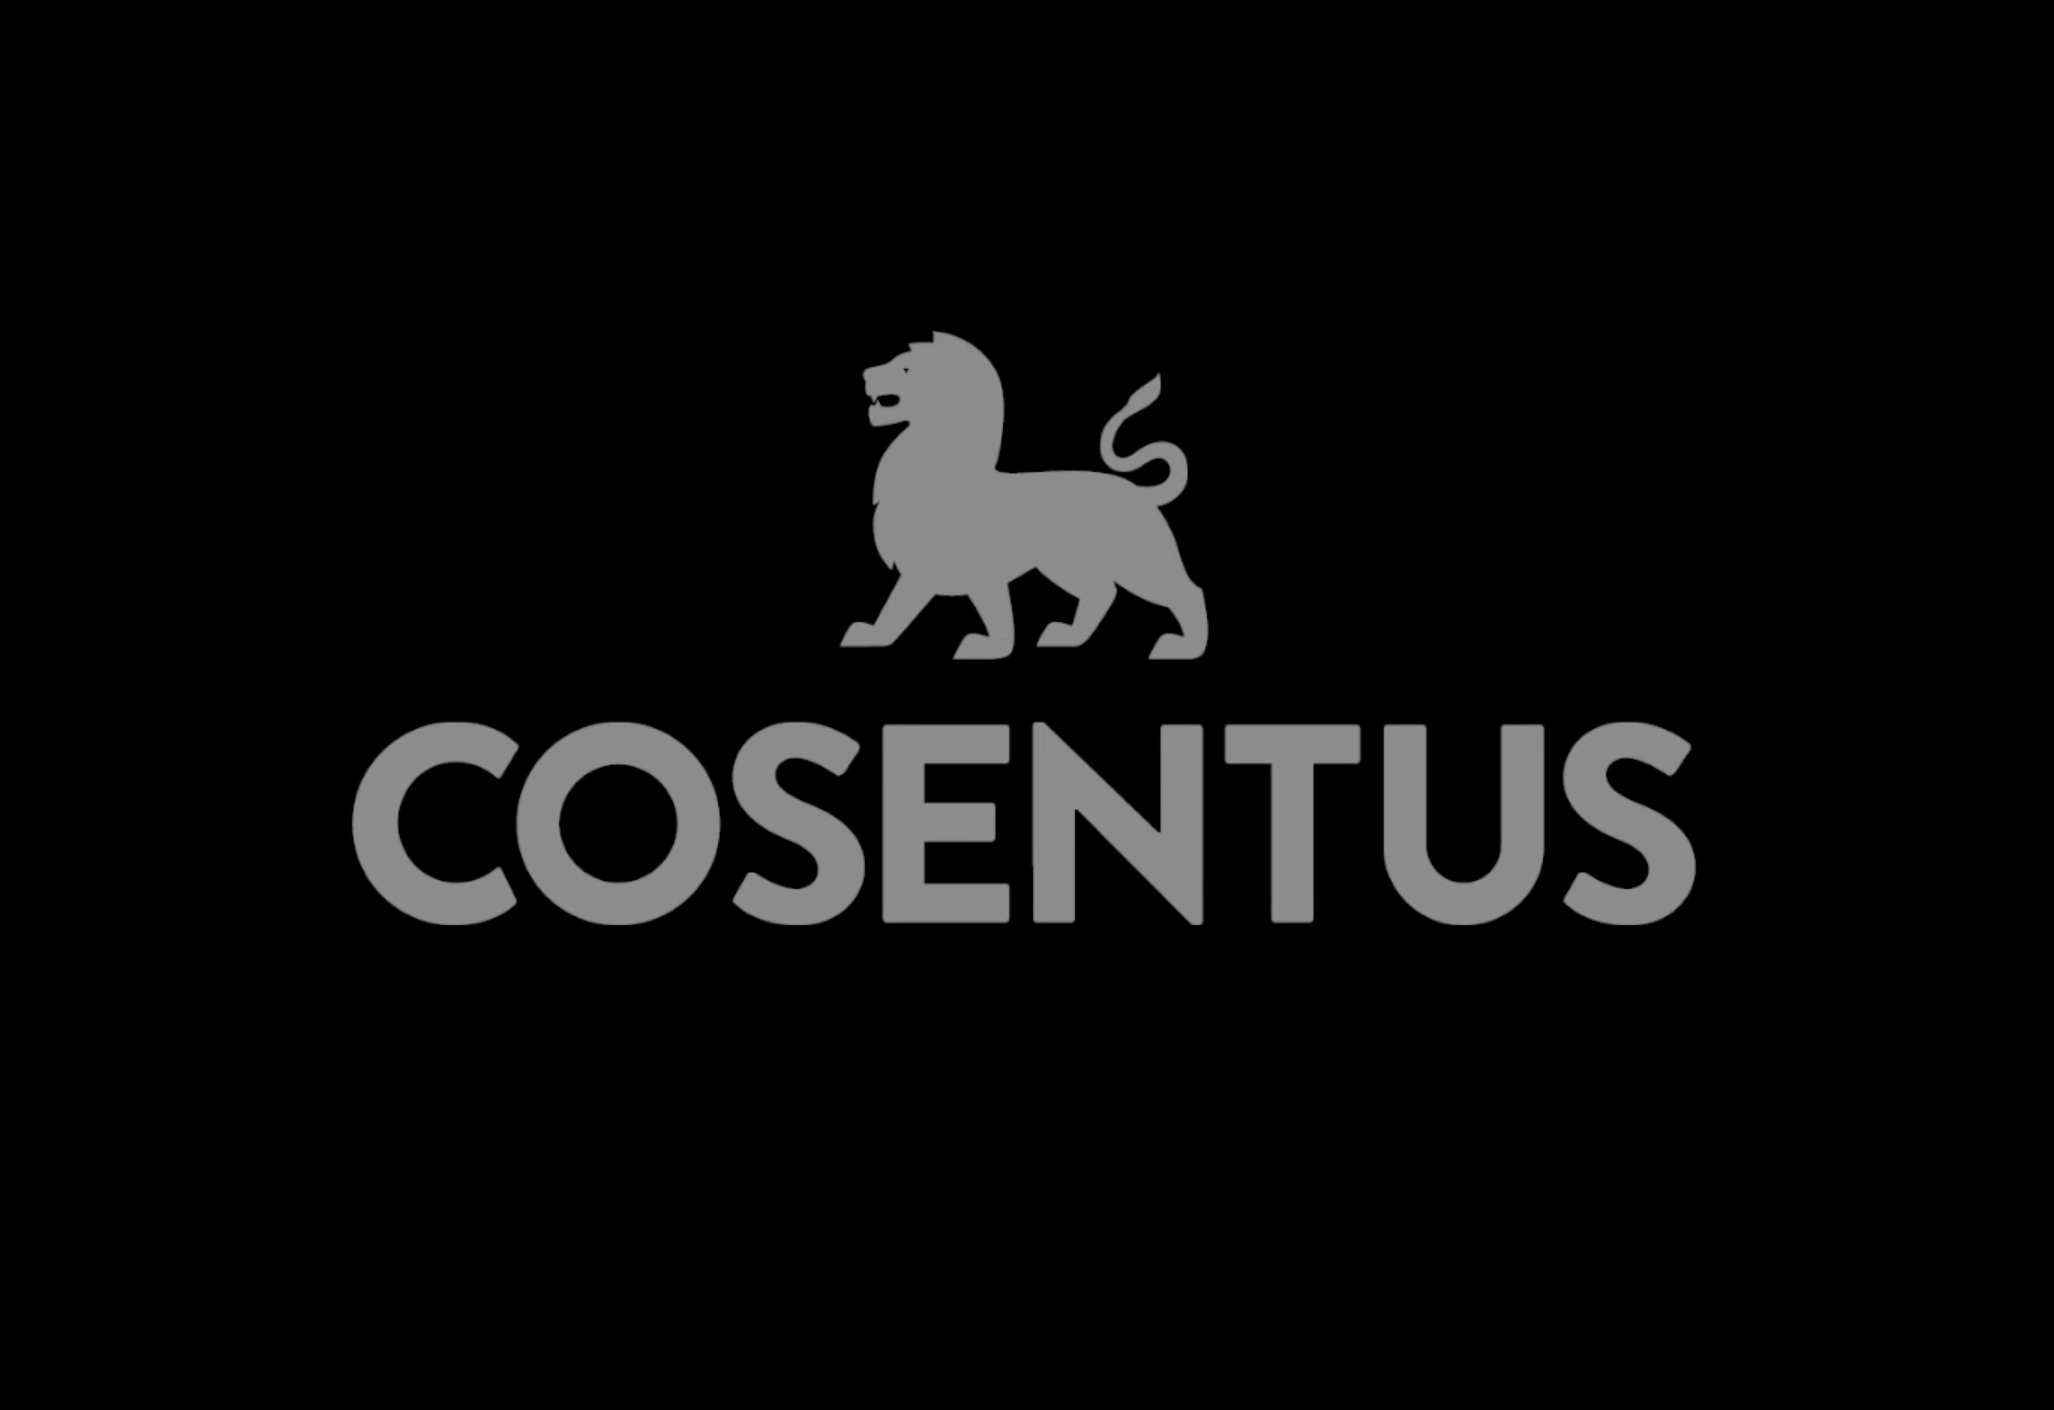 Video: Cosentus Company Culture Video created by the employees of Cosentus.